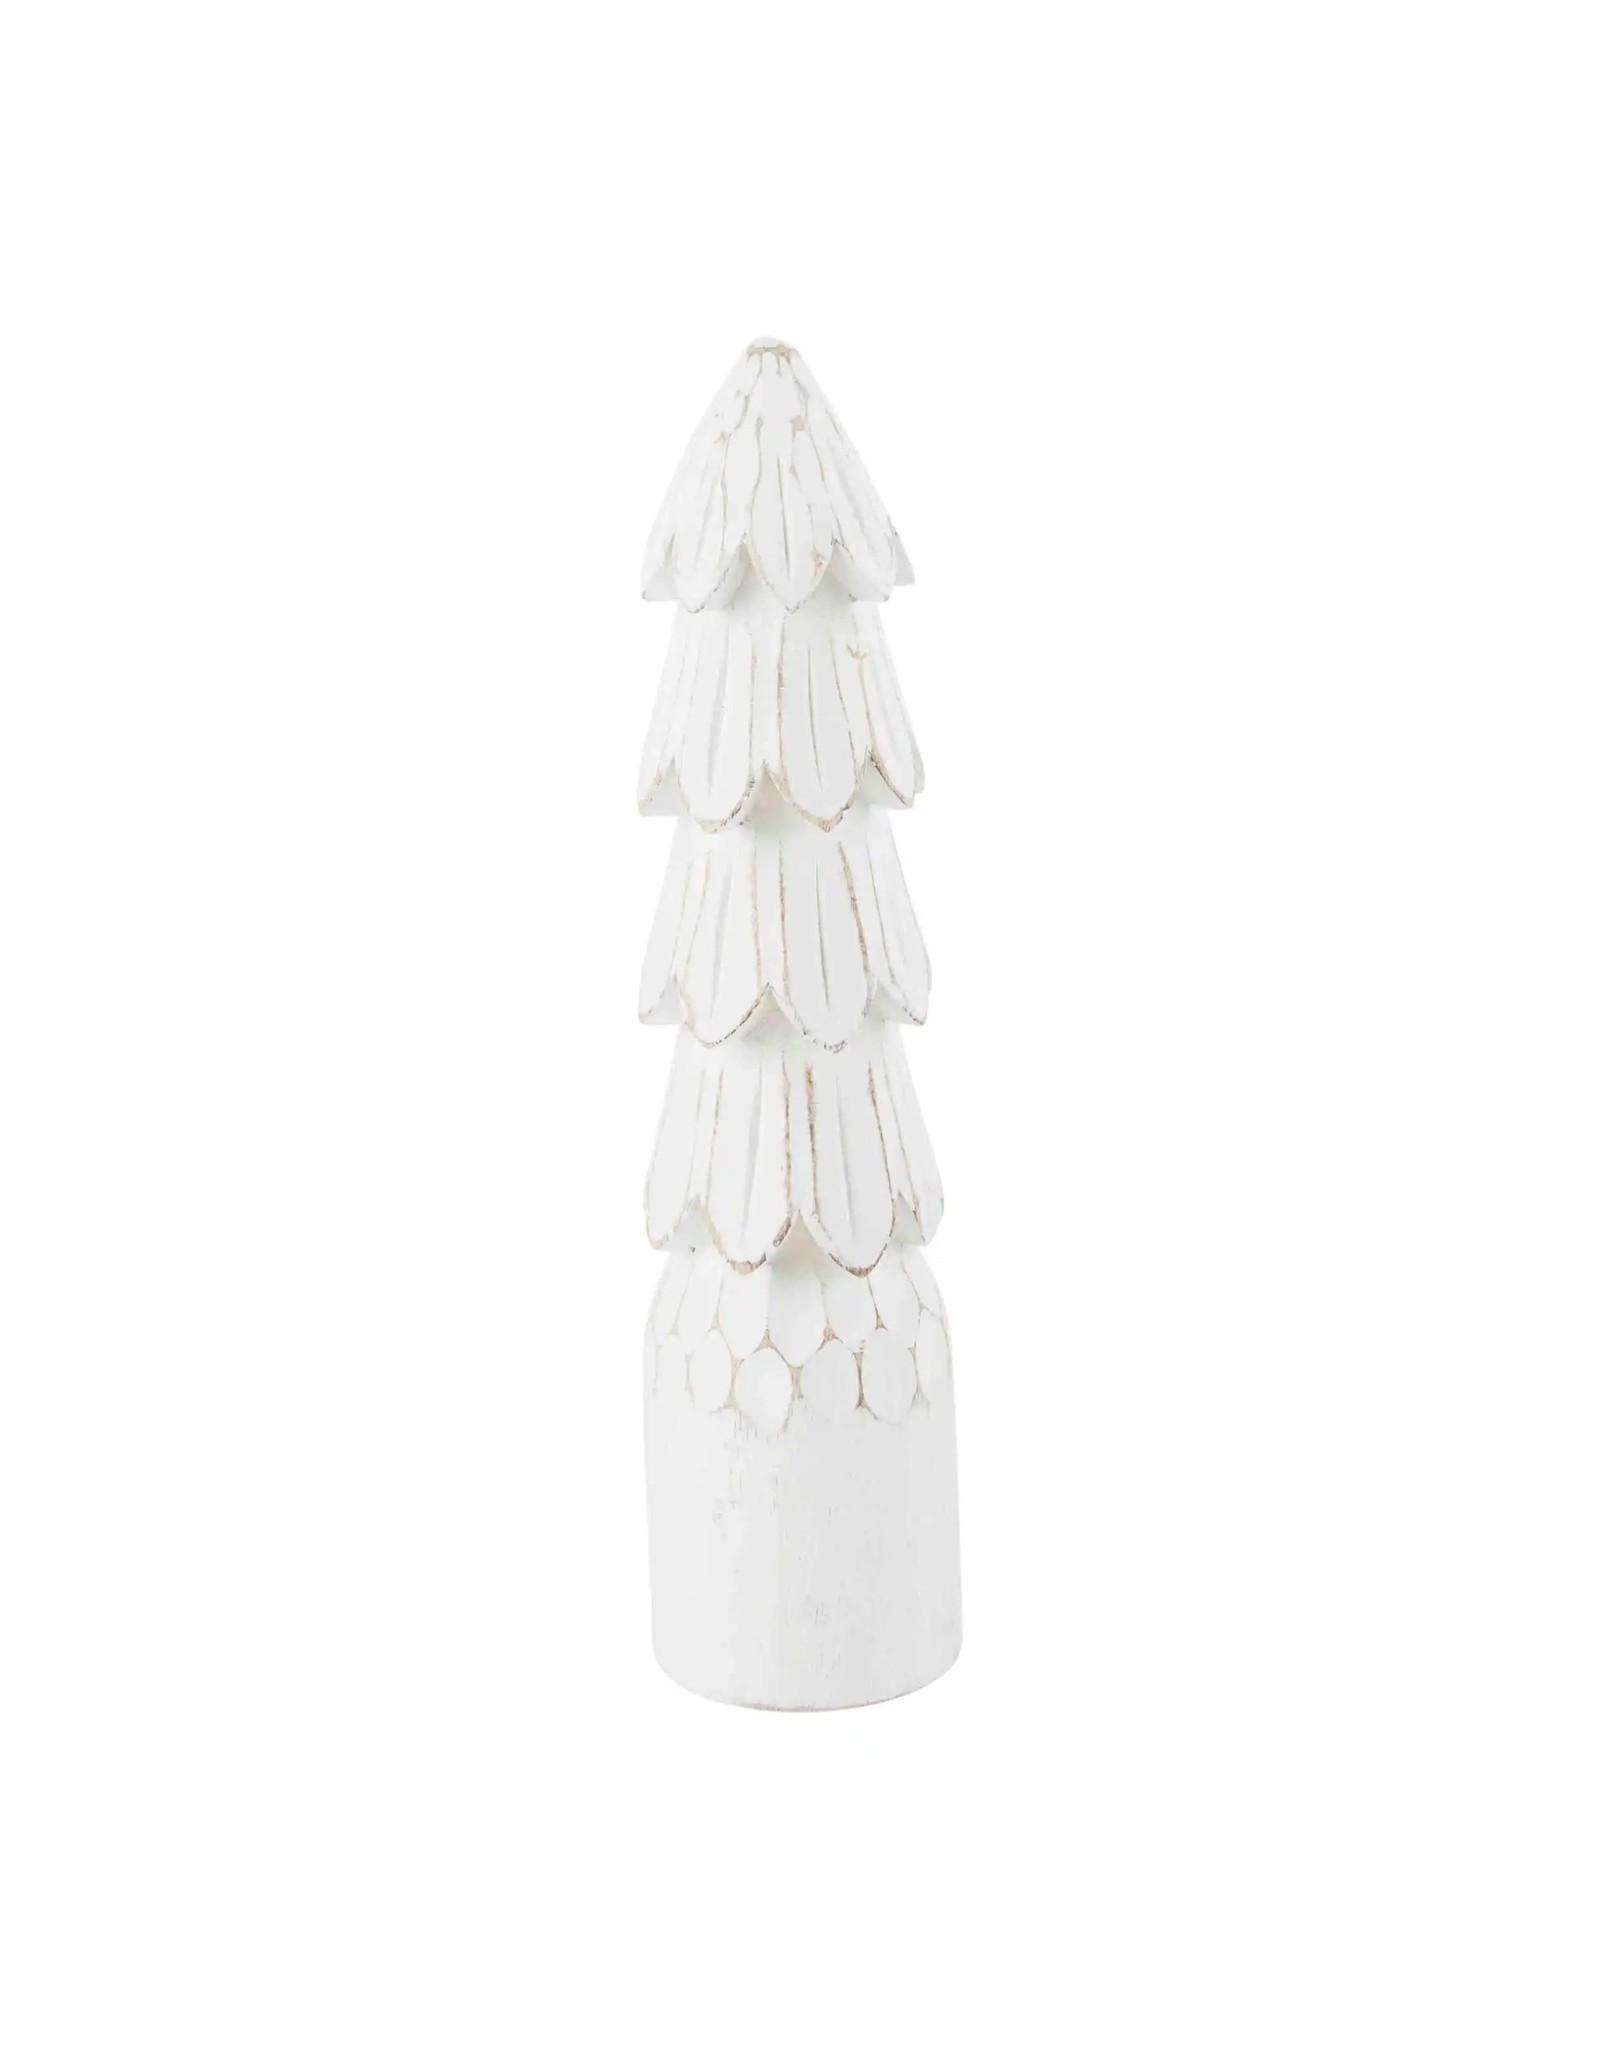 Mudpie Small White Carved Tree